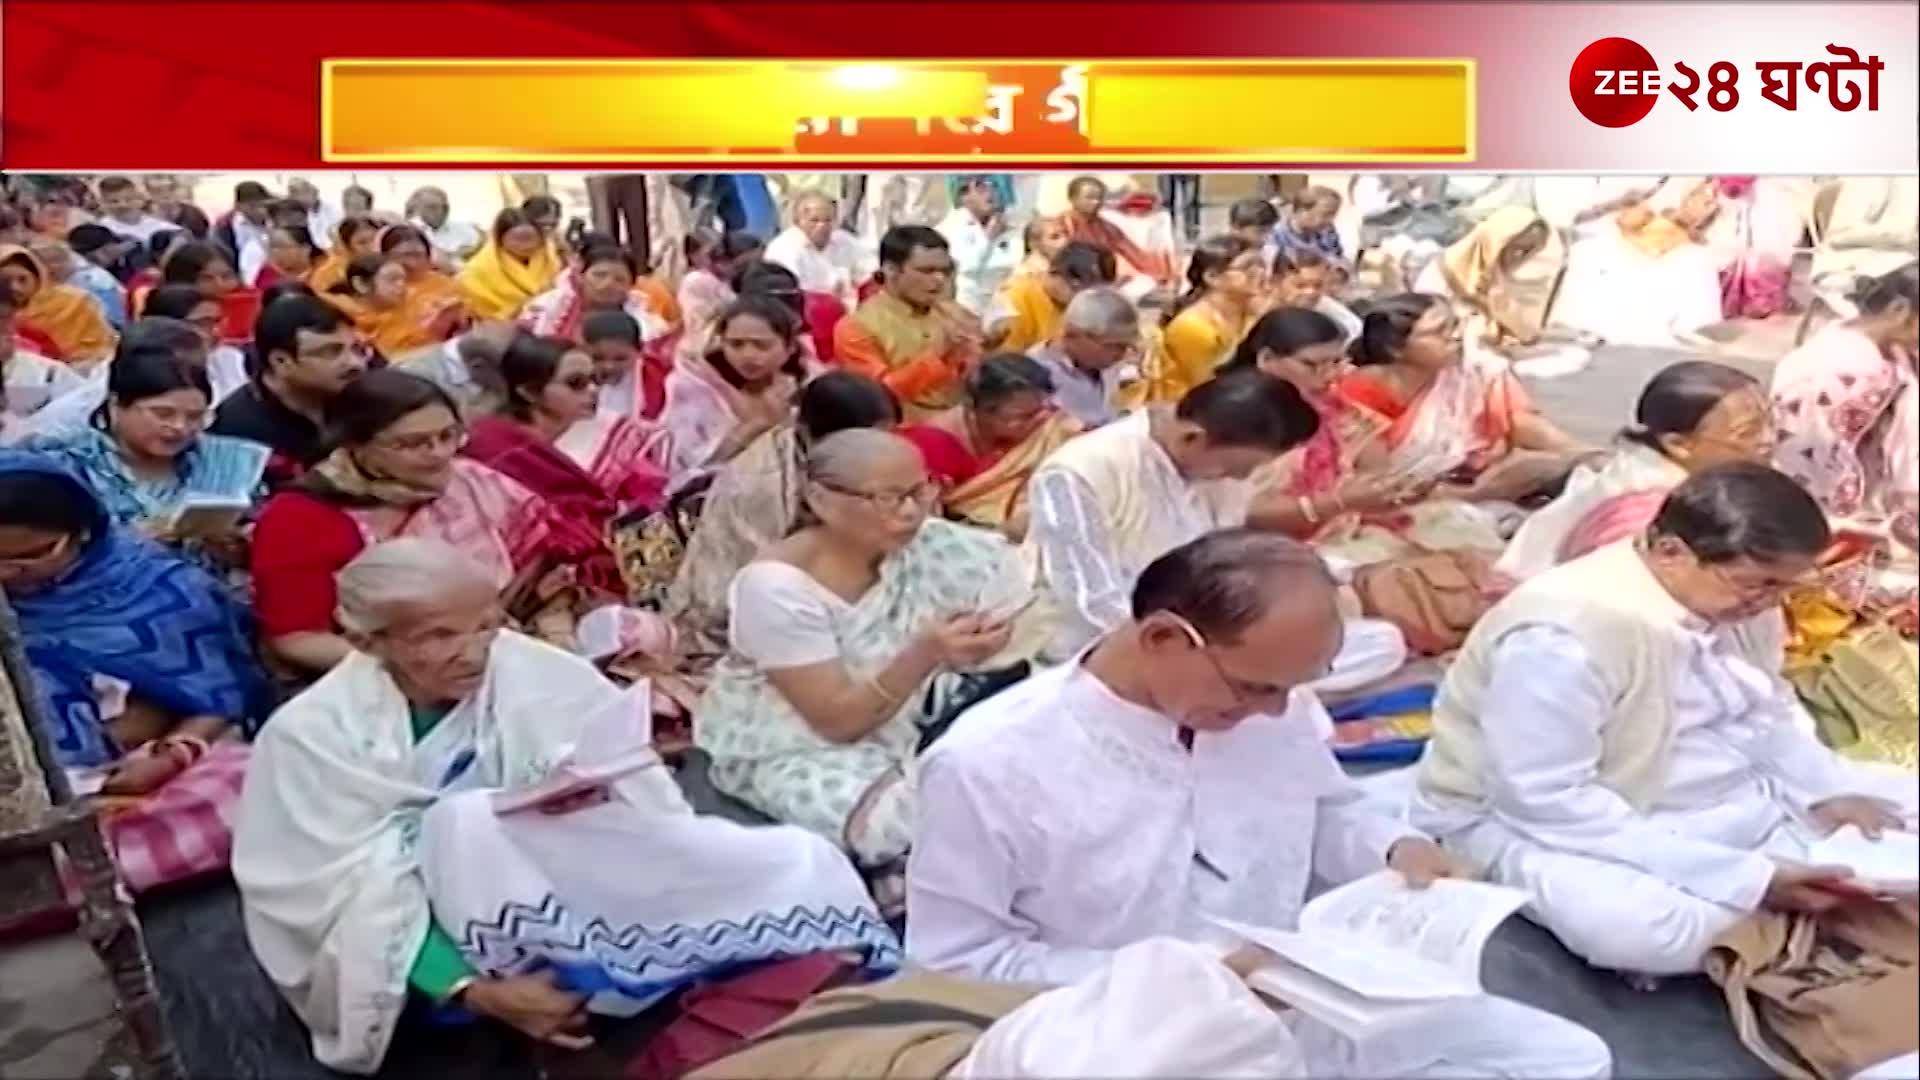 2 thousand voices reading the Gita at Mahesh temple 